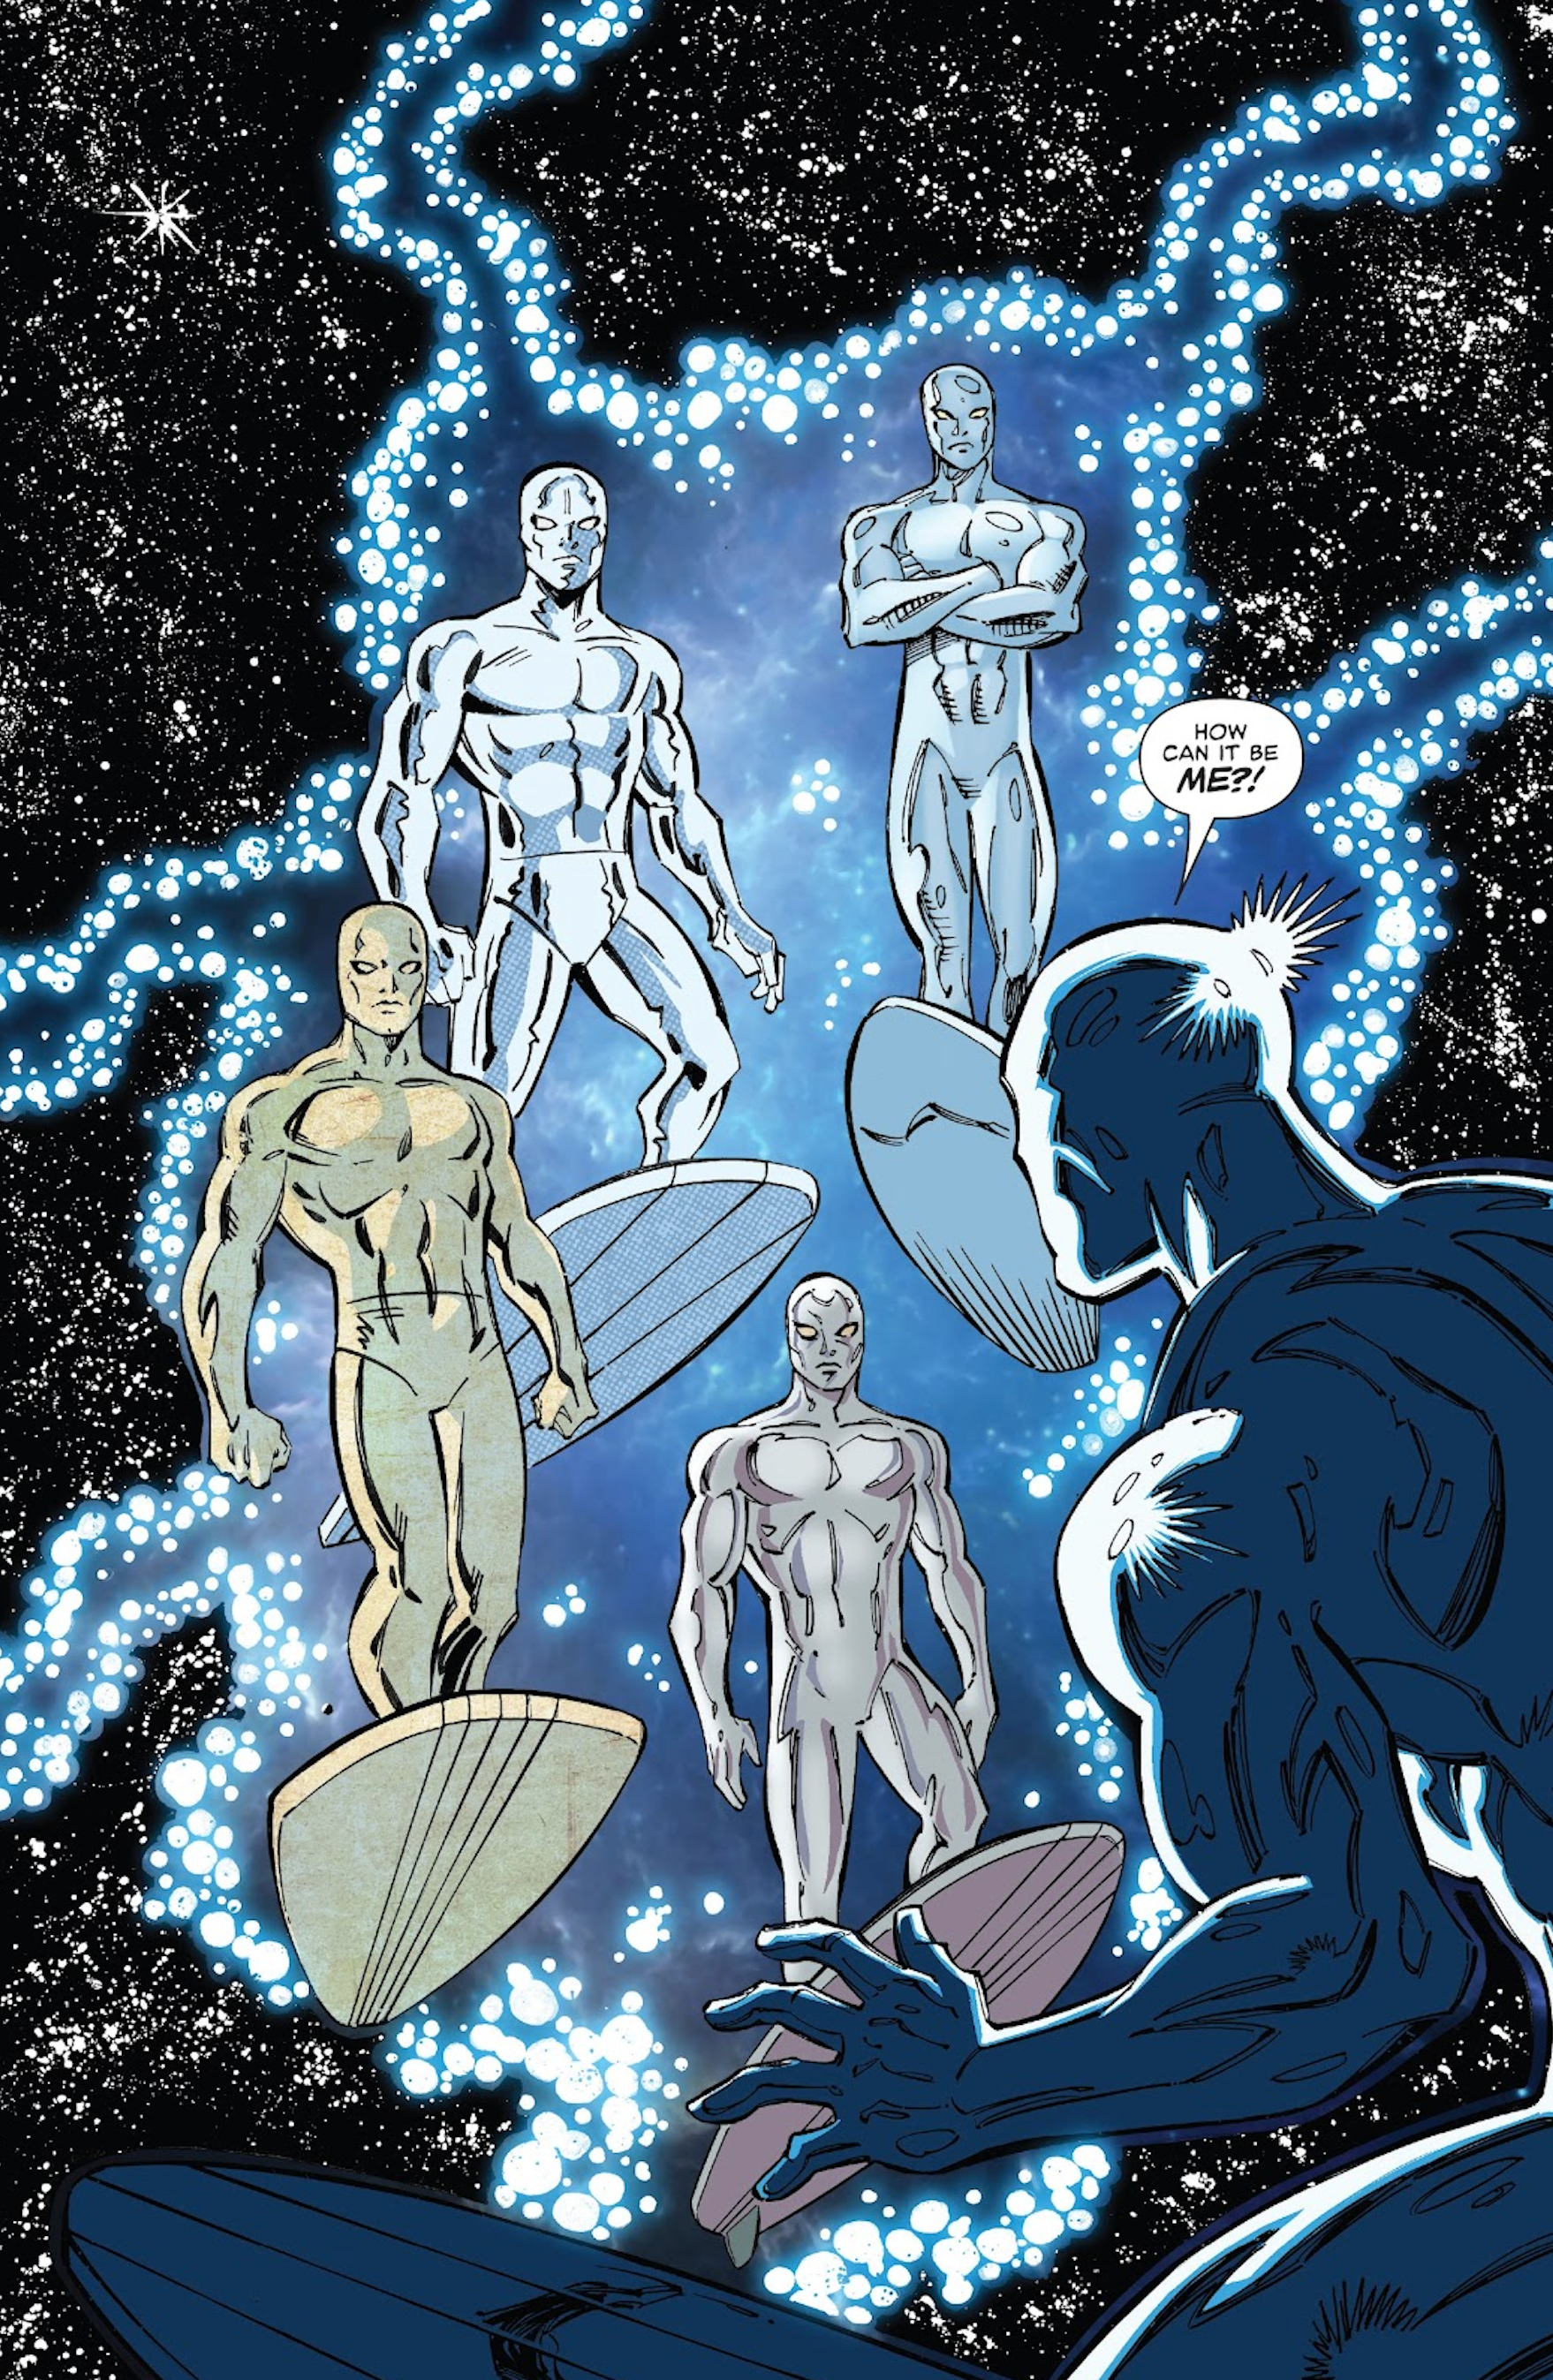 Silver Surfer meets his many variants